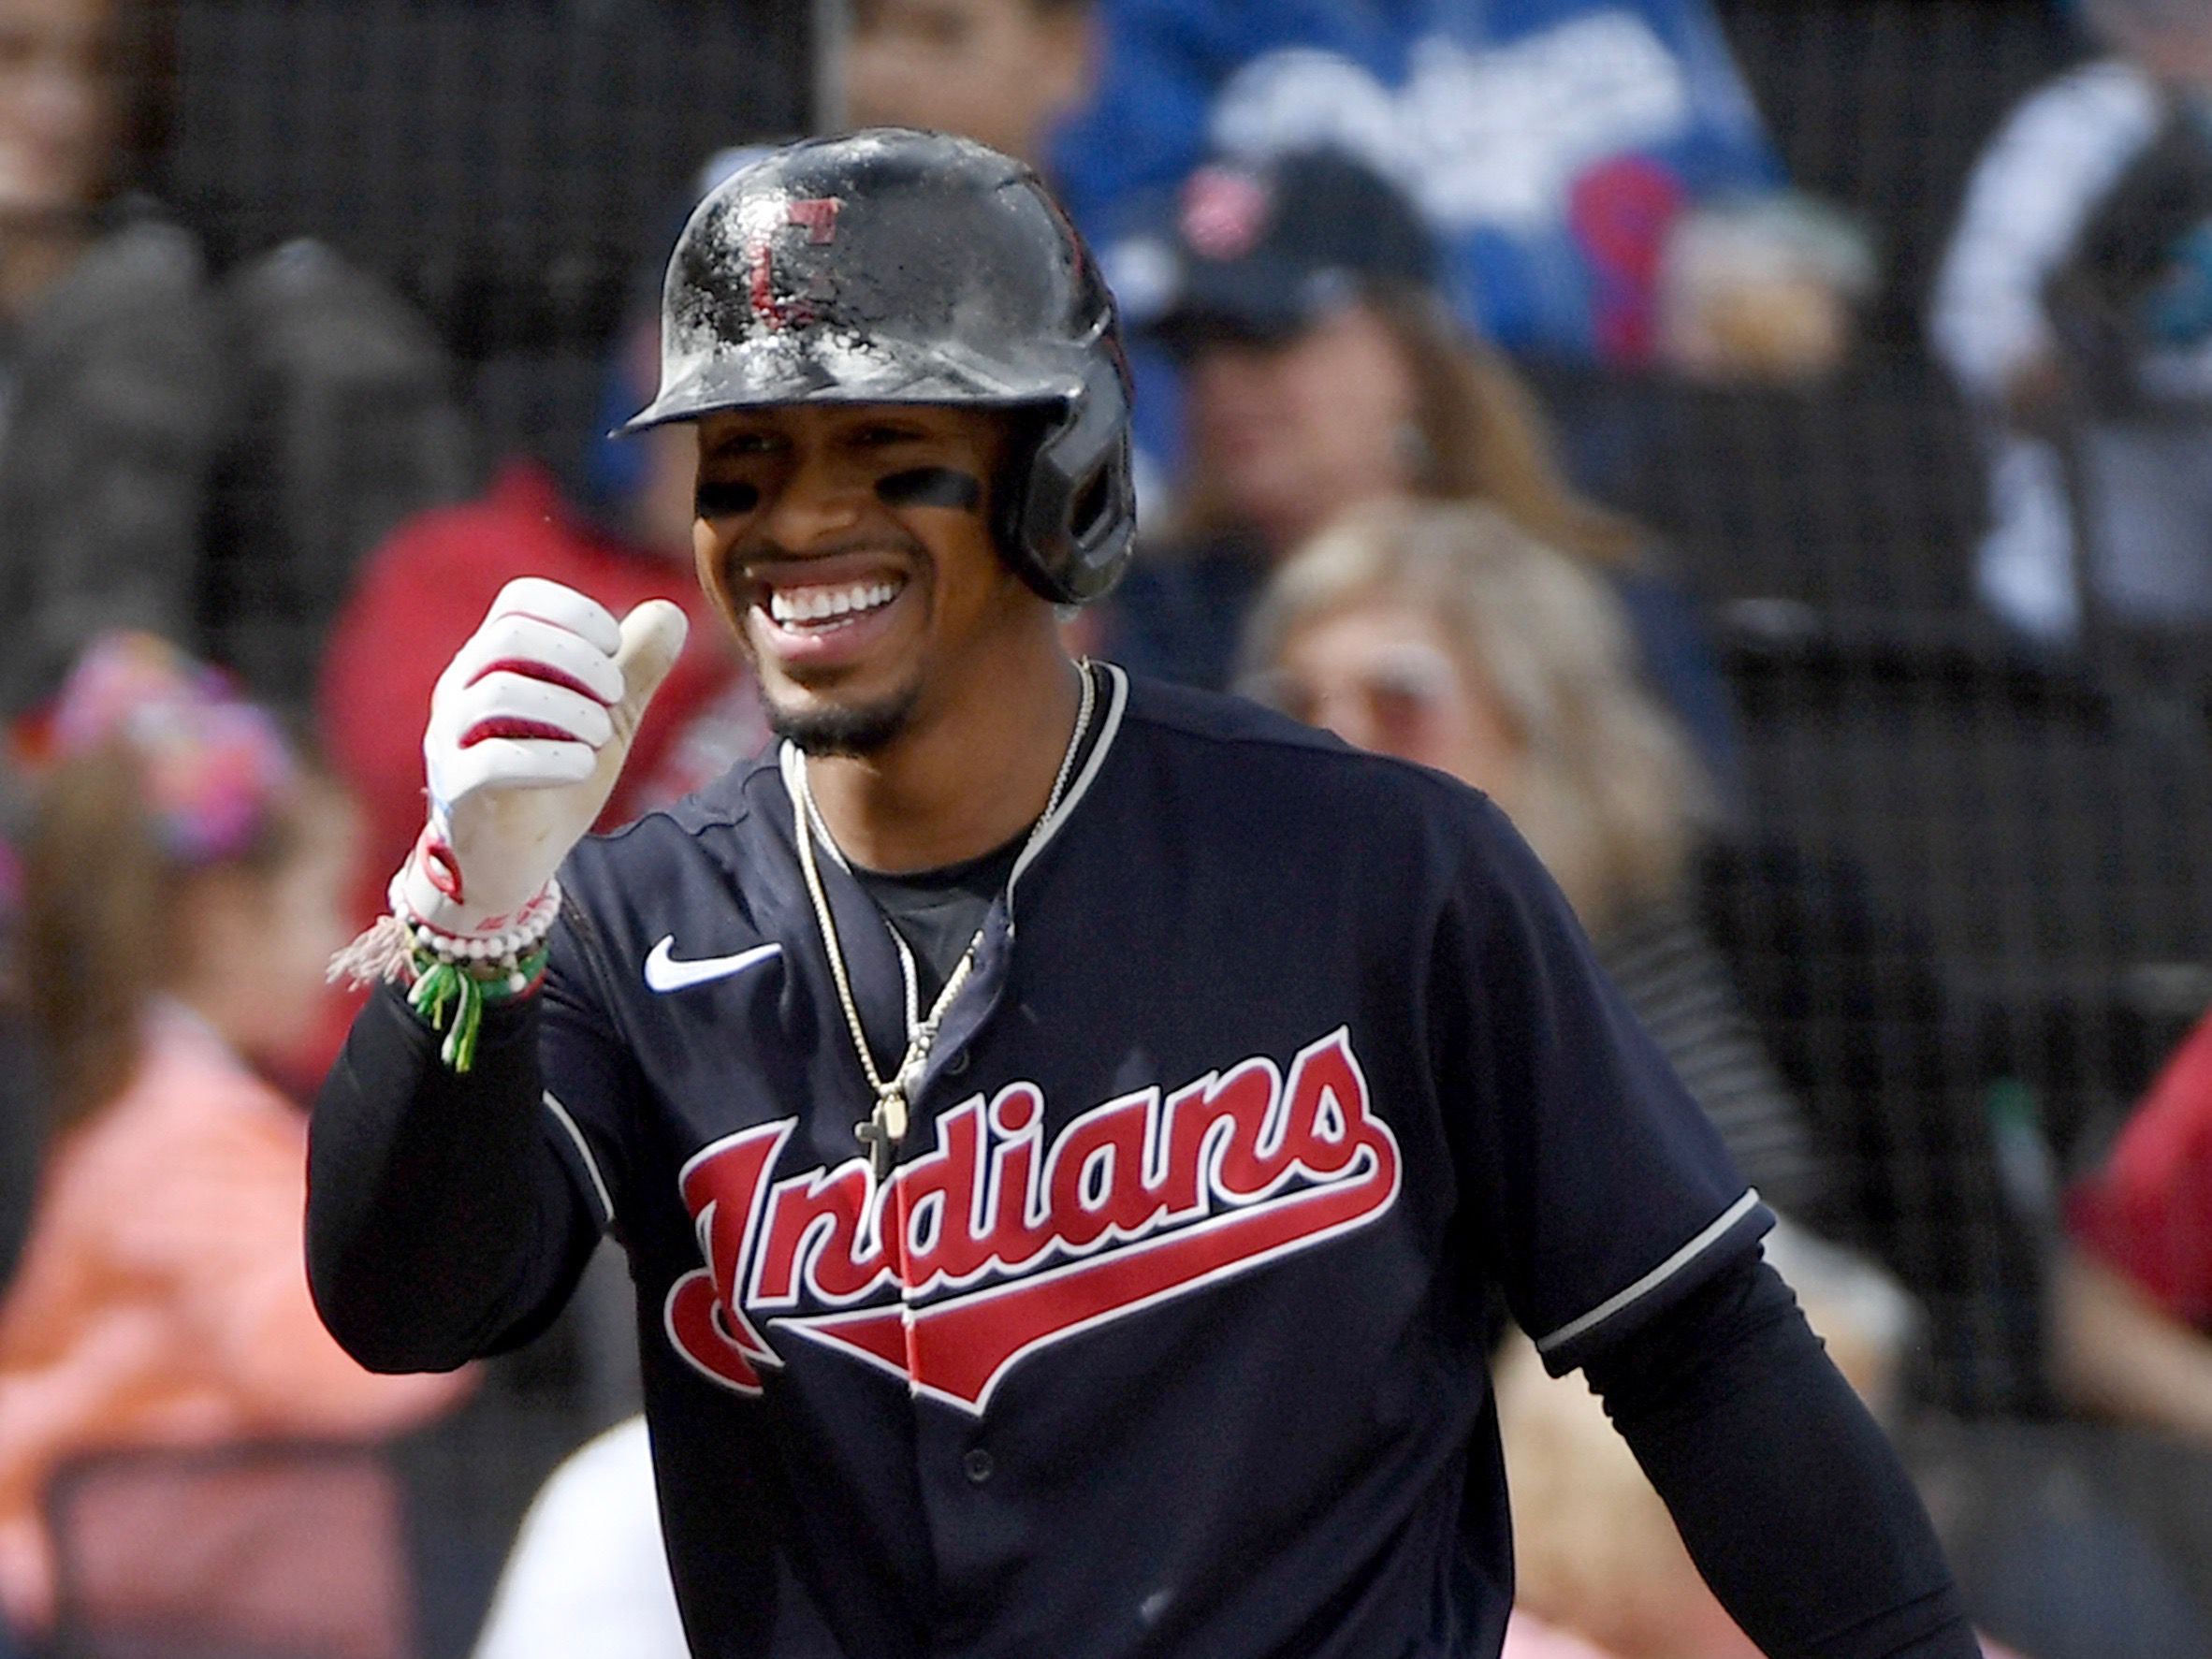 Different season, same rumors about Cleveland Indians' Francisco Lindor:  The week in baseball 